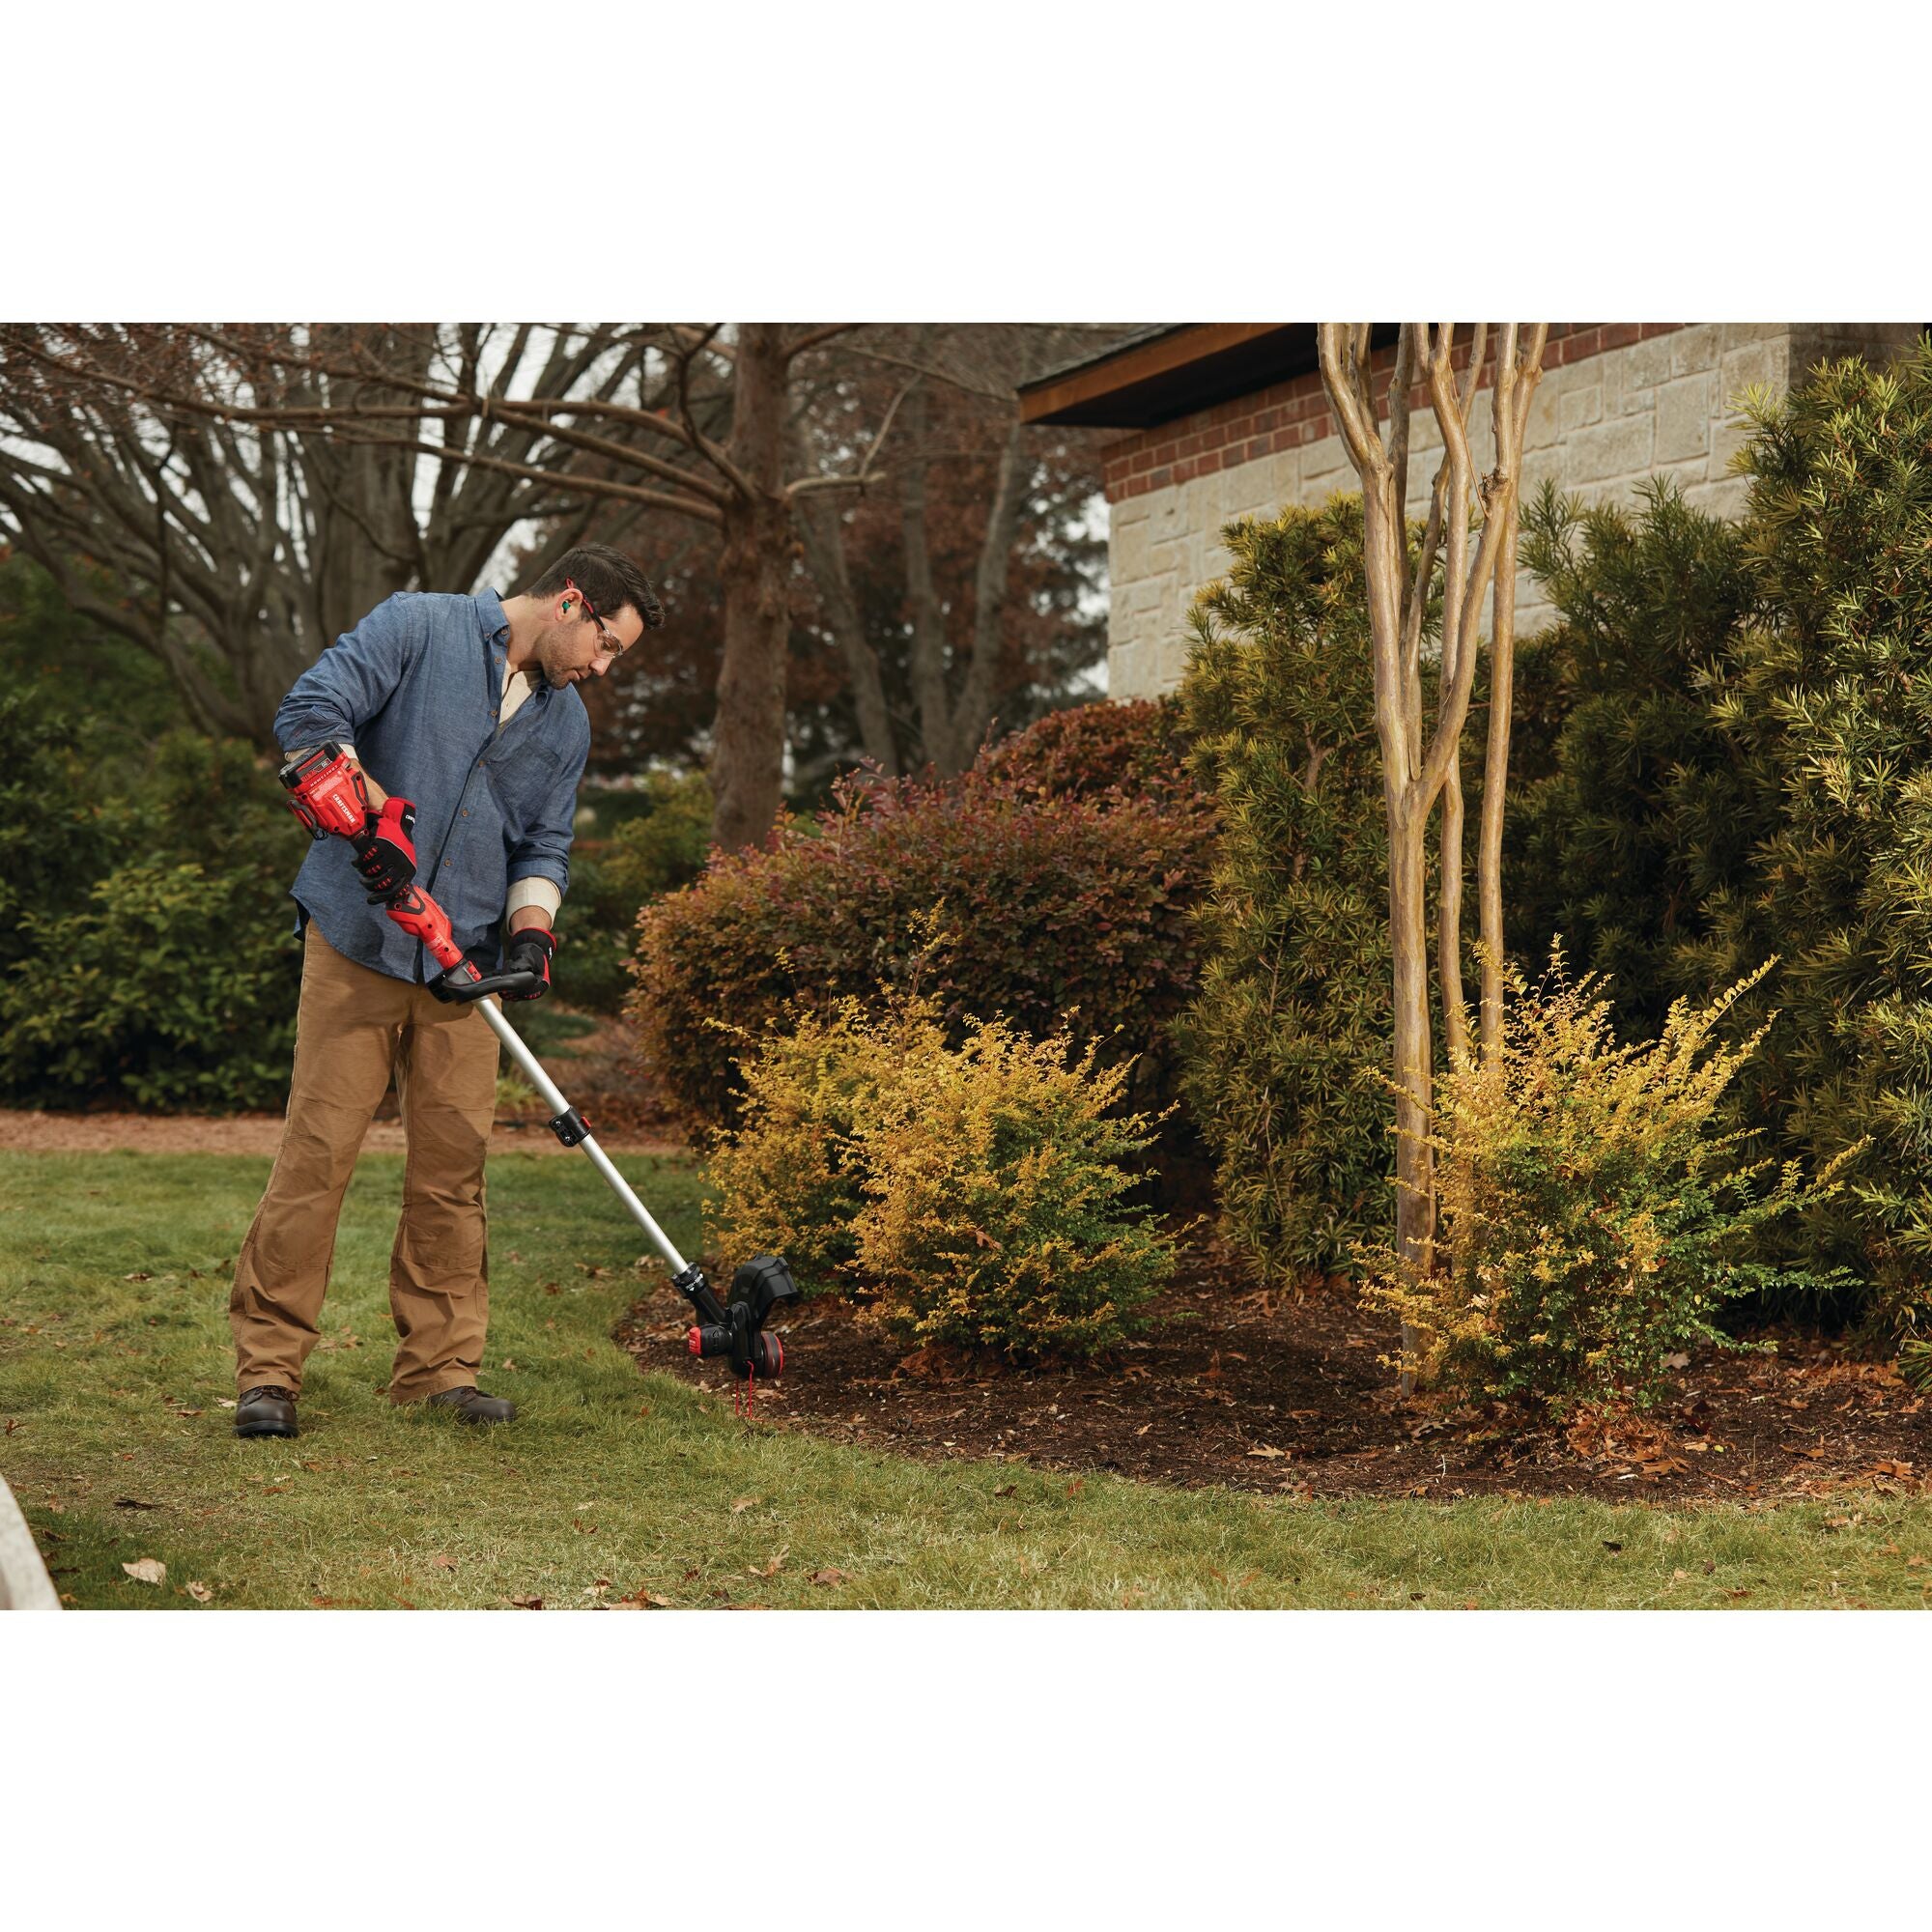 20 volt cordless 13 inch weedwacker string trimmer edger with push button feed being used by a person to trim grass outdoors.